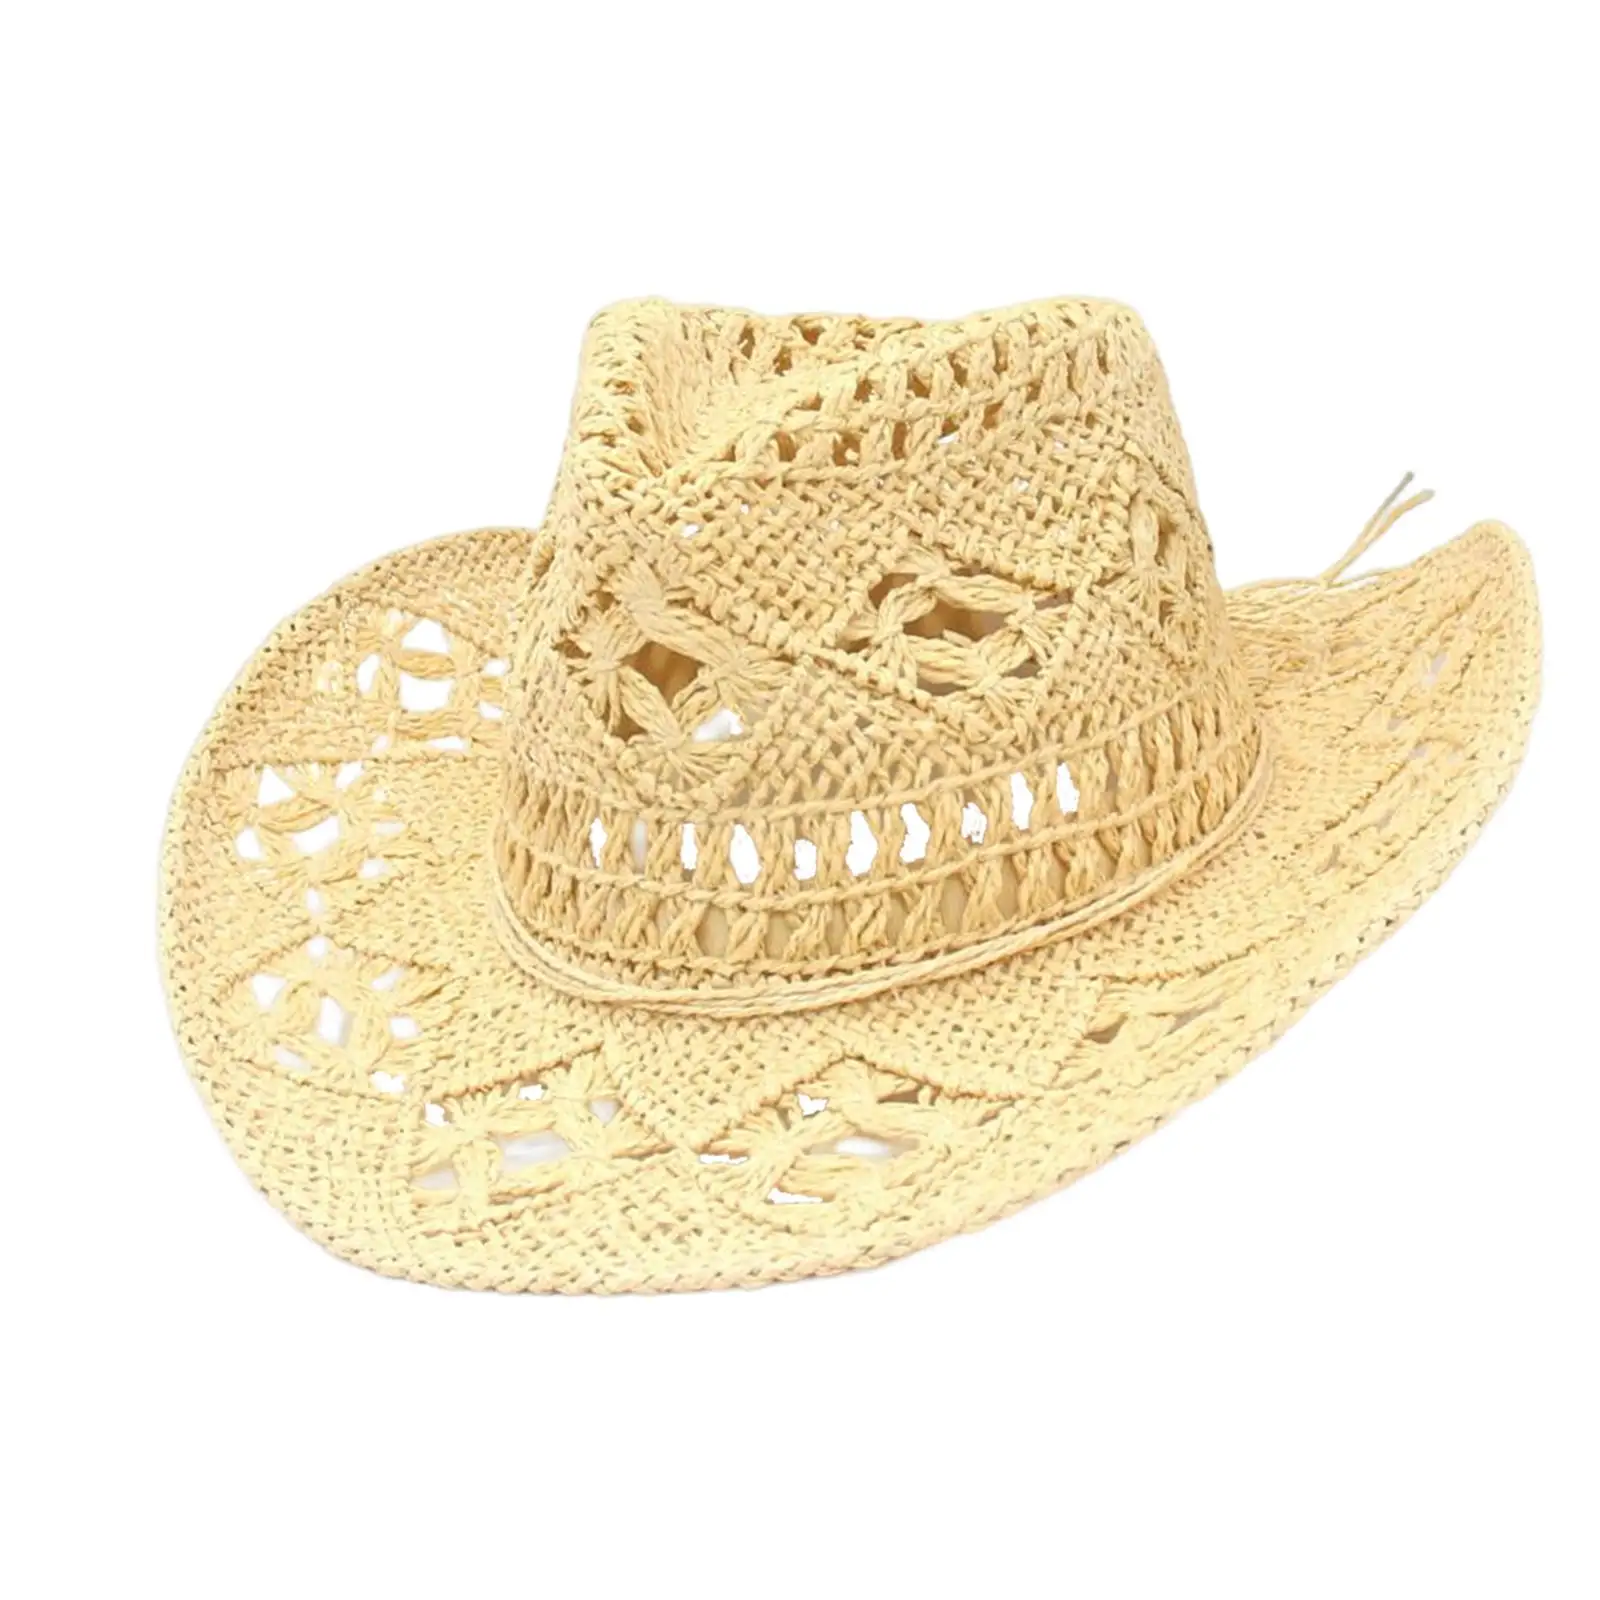 Straw Western Cowboy Hat Hand Woven Floppy Beach Hat for Vacation Outdoor